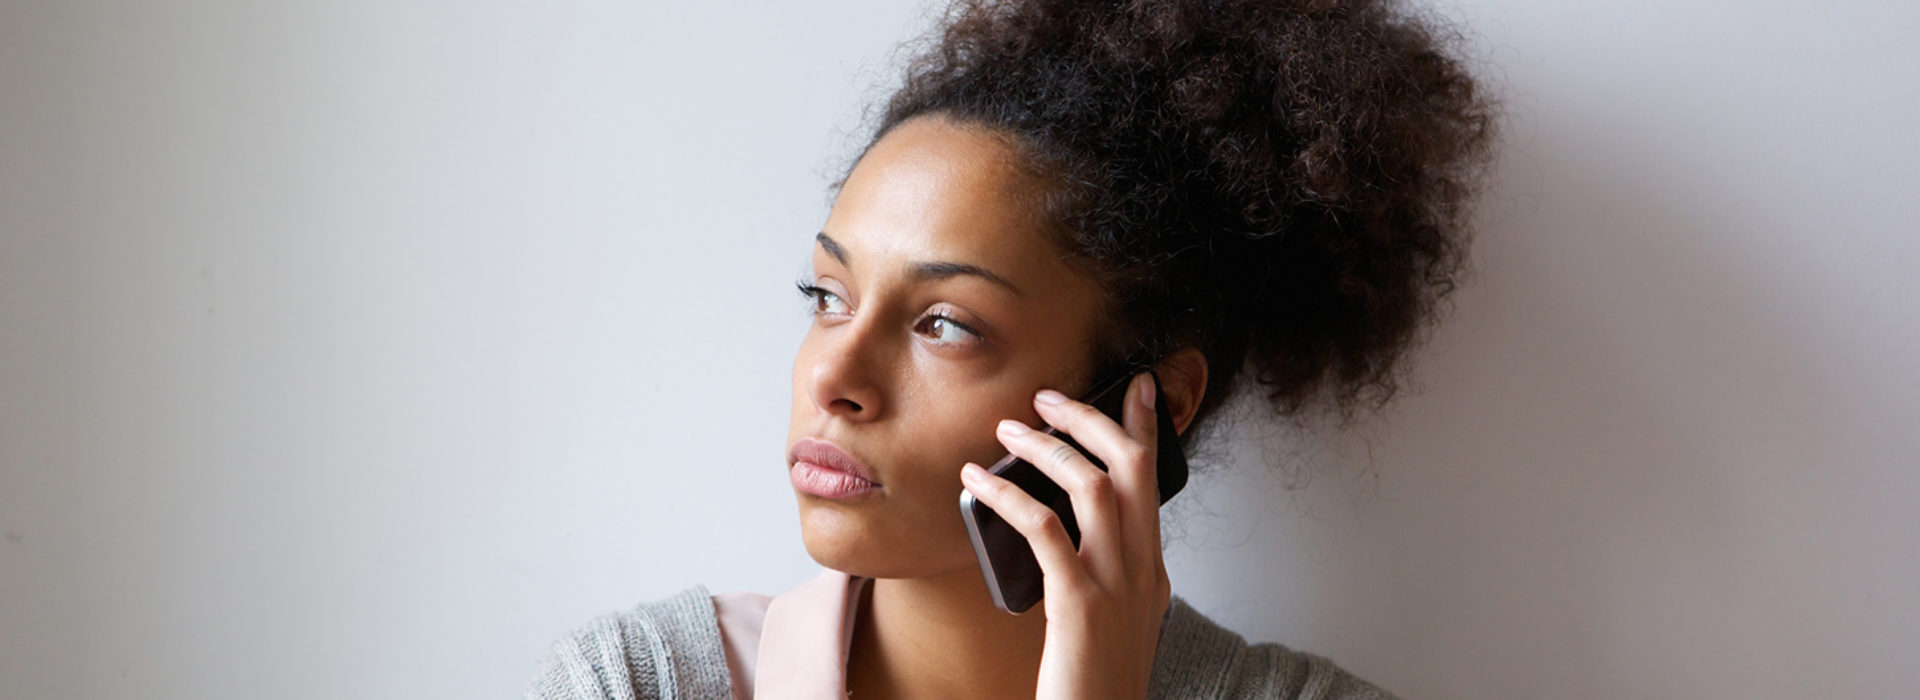 Concerned black woman on phone